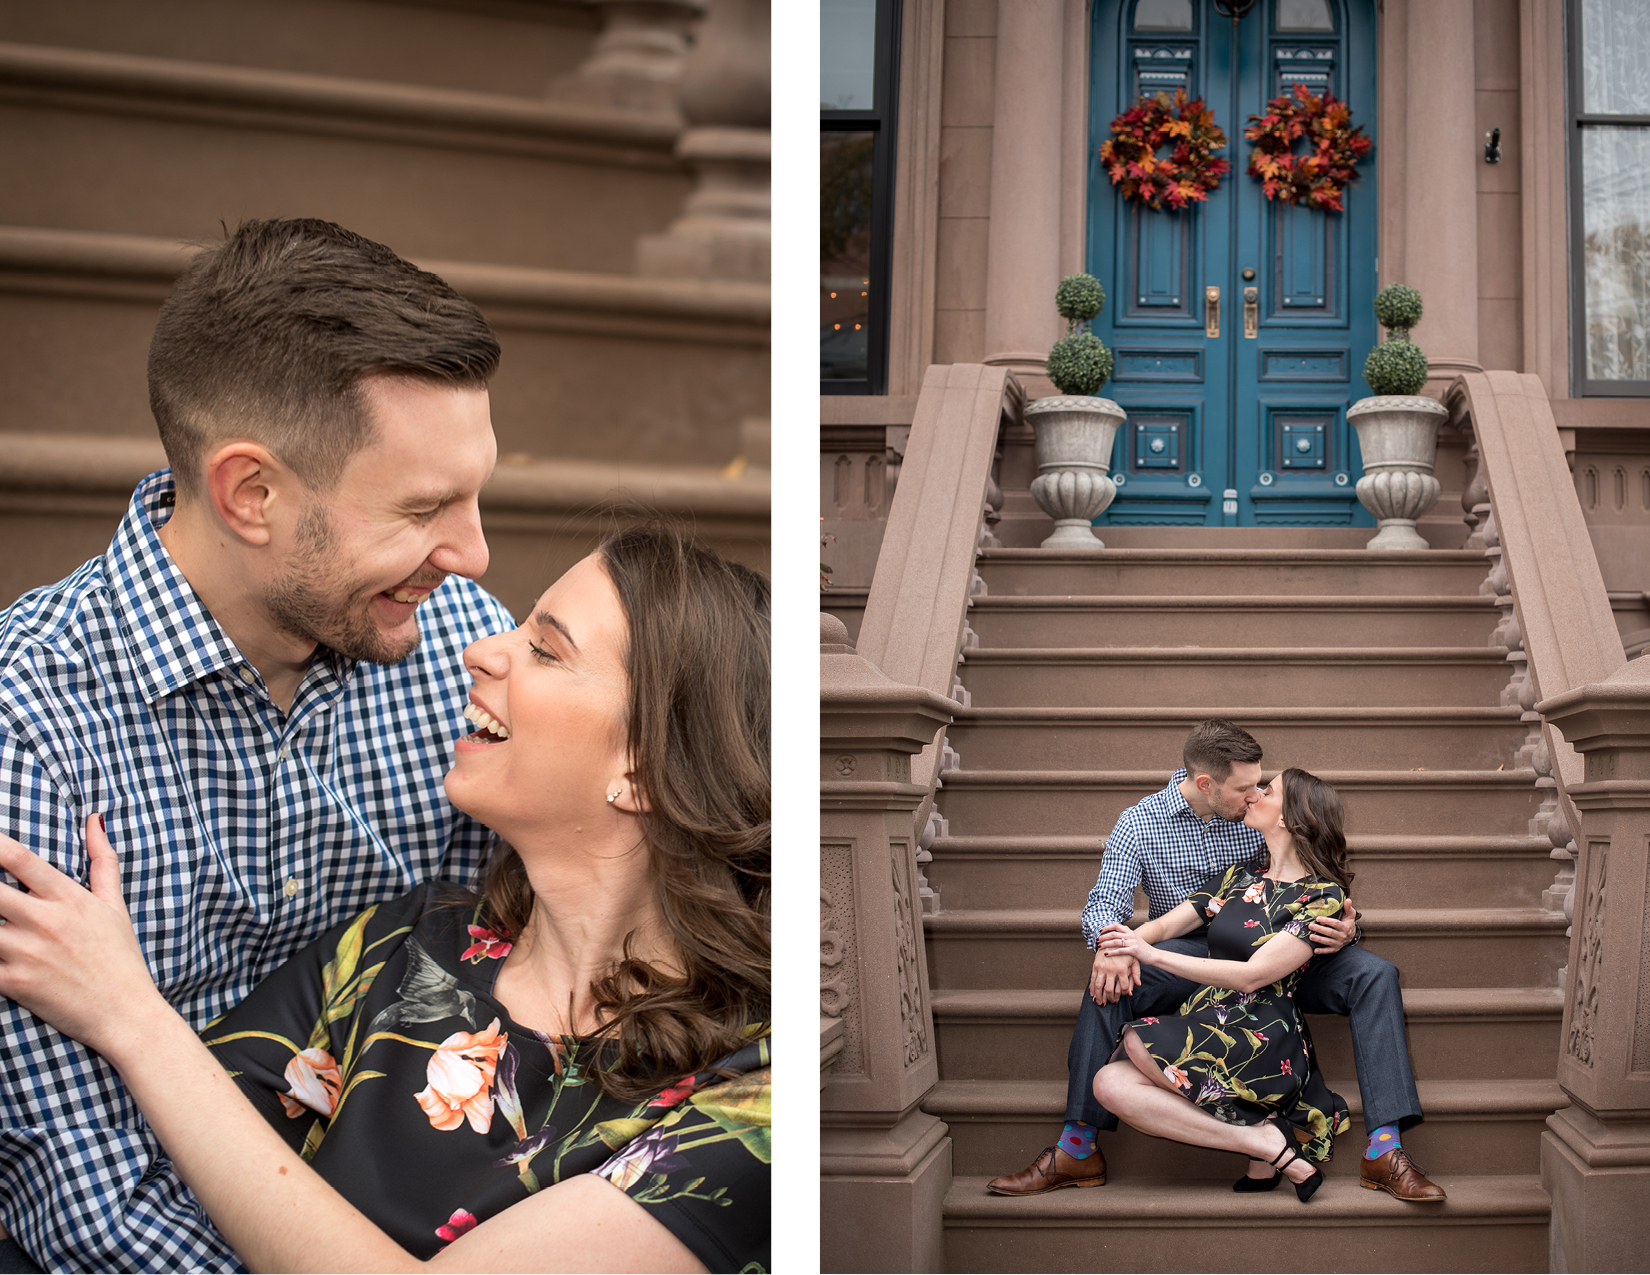 Patrick and Patricia Engagement :: Hoboken, NJ – Michelle Lala Clark Photography1650 x 1275